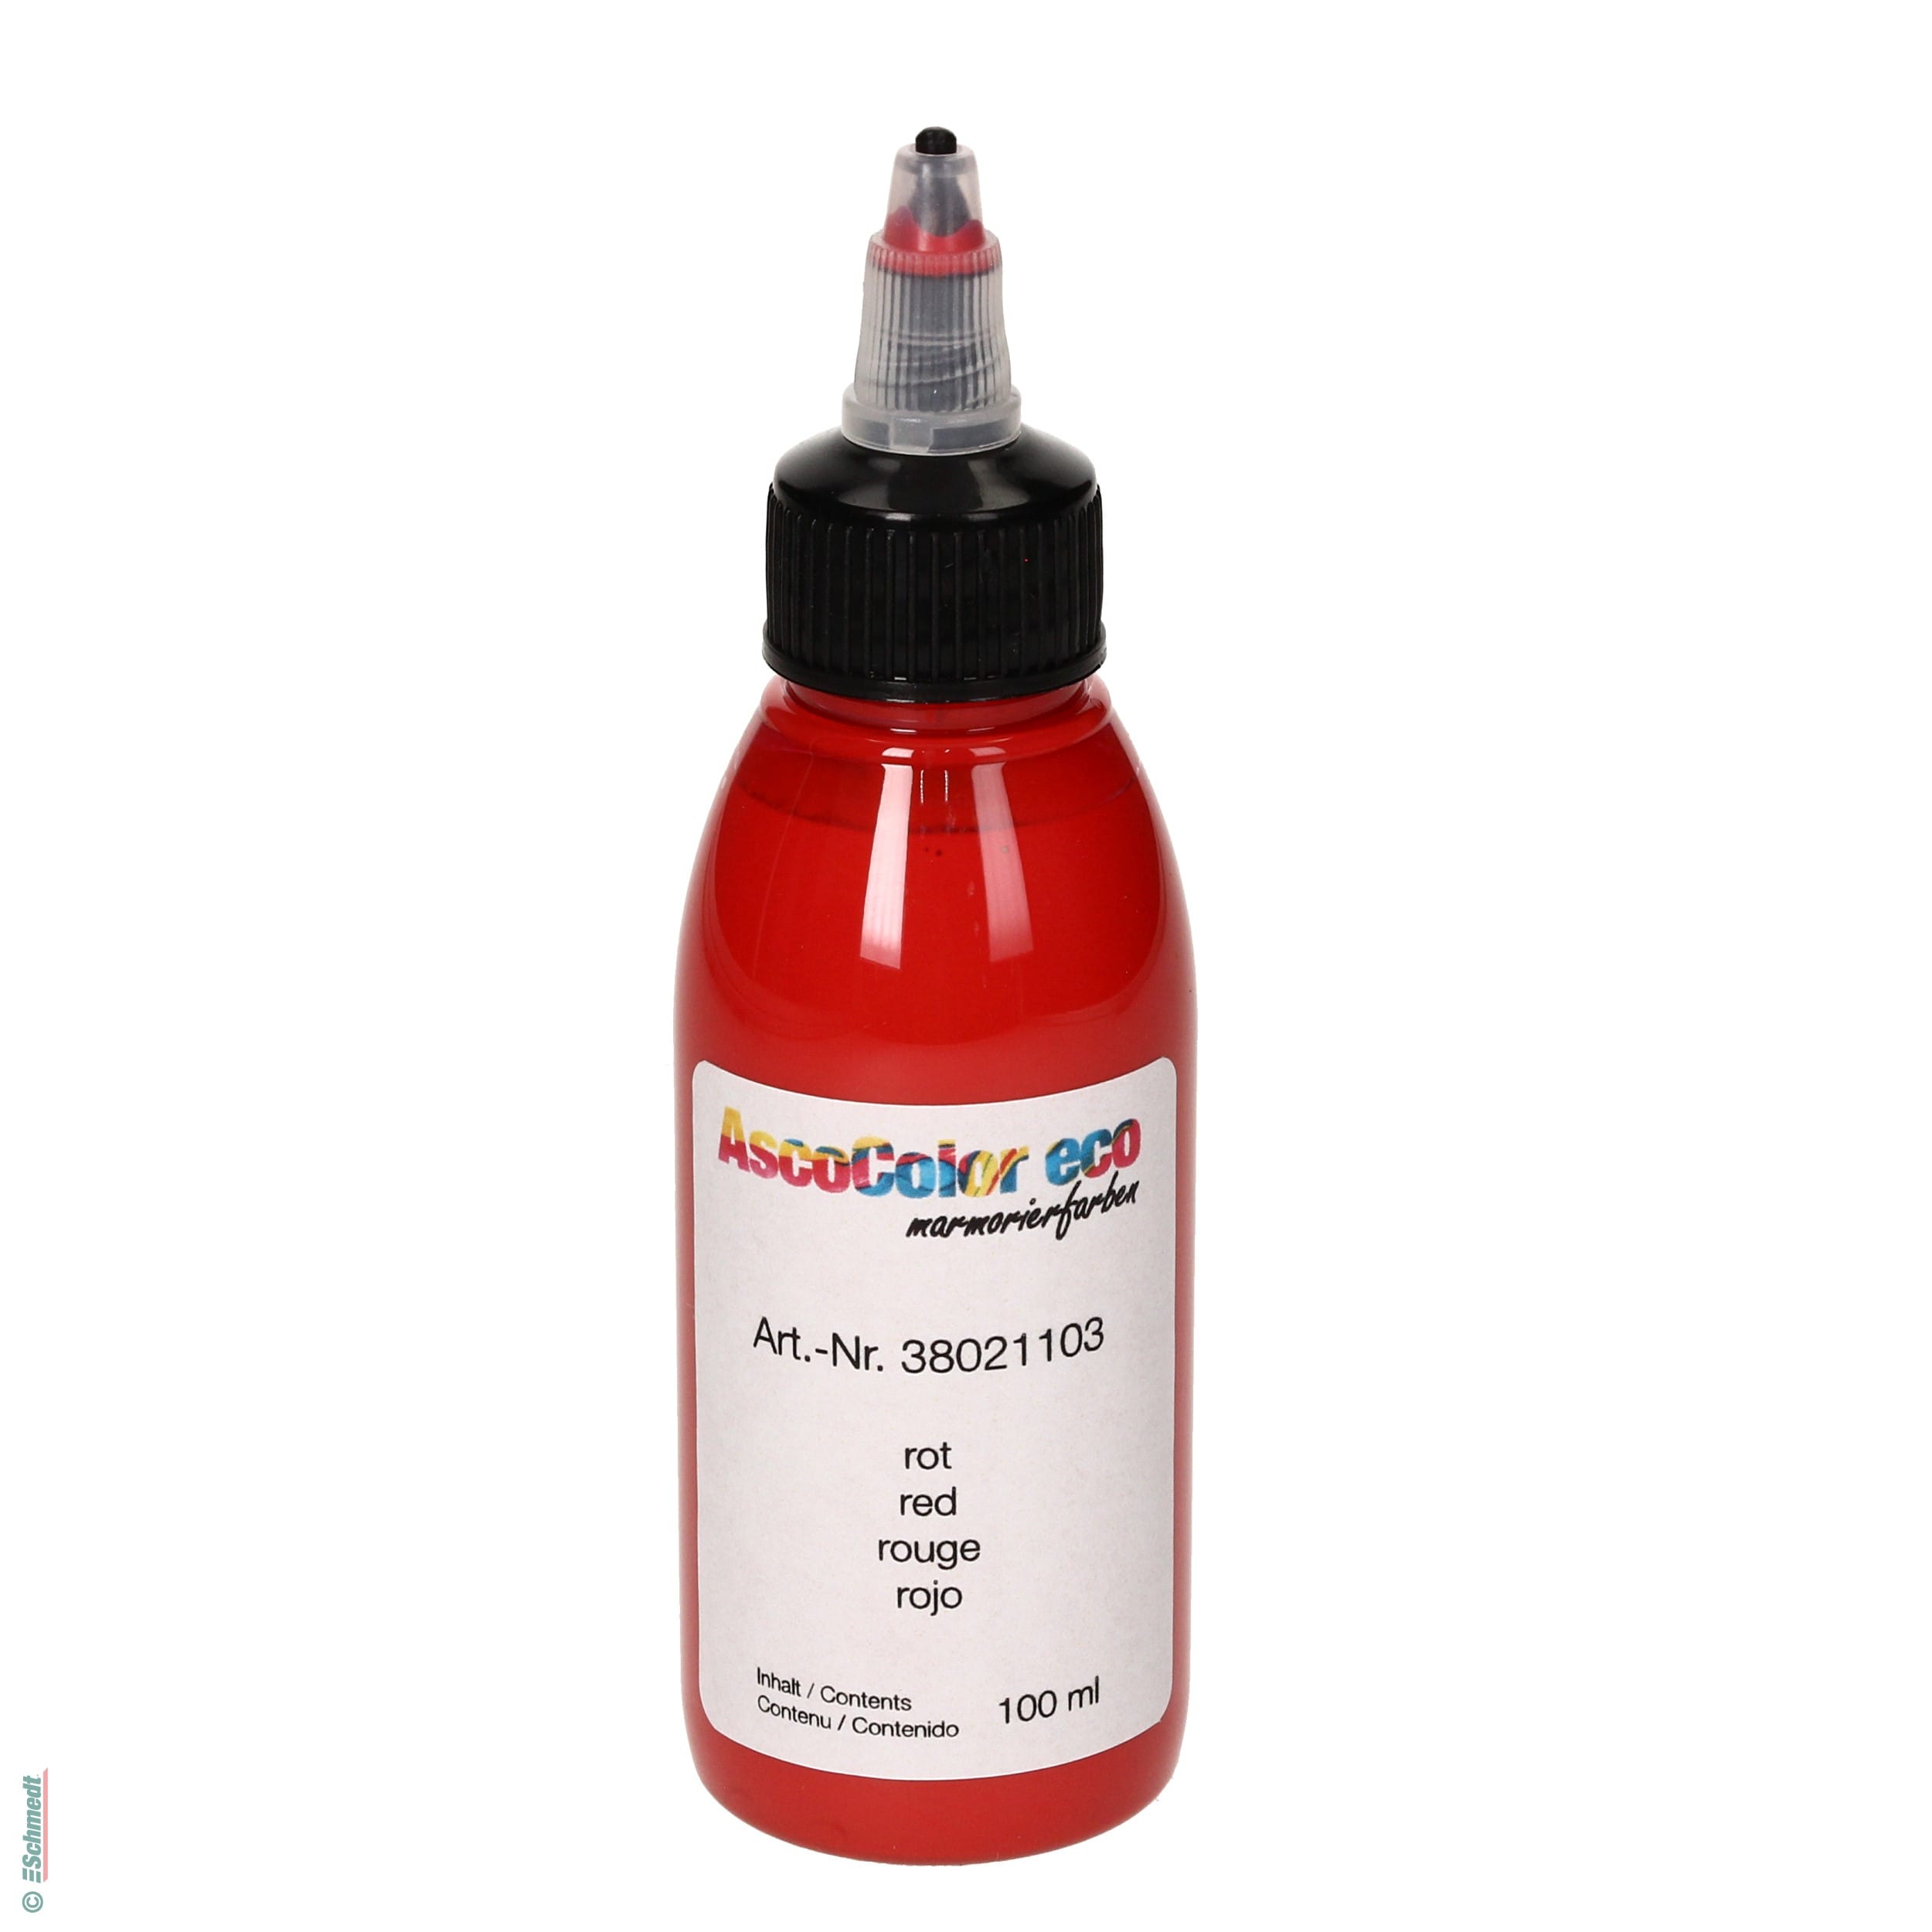 AscoColor eco - Marbling dye - Colour 103 - red - Contents Bottle / 100 ml - to produce marbled papers...